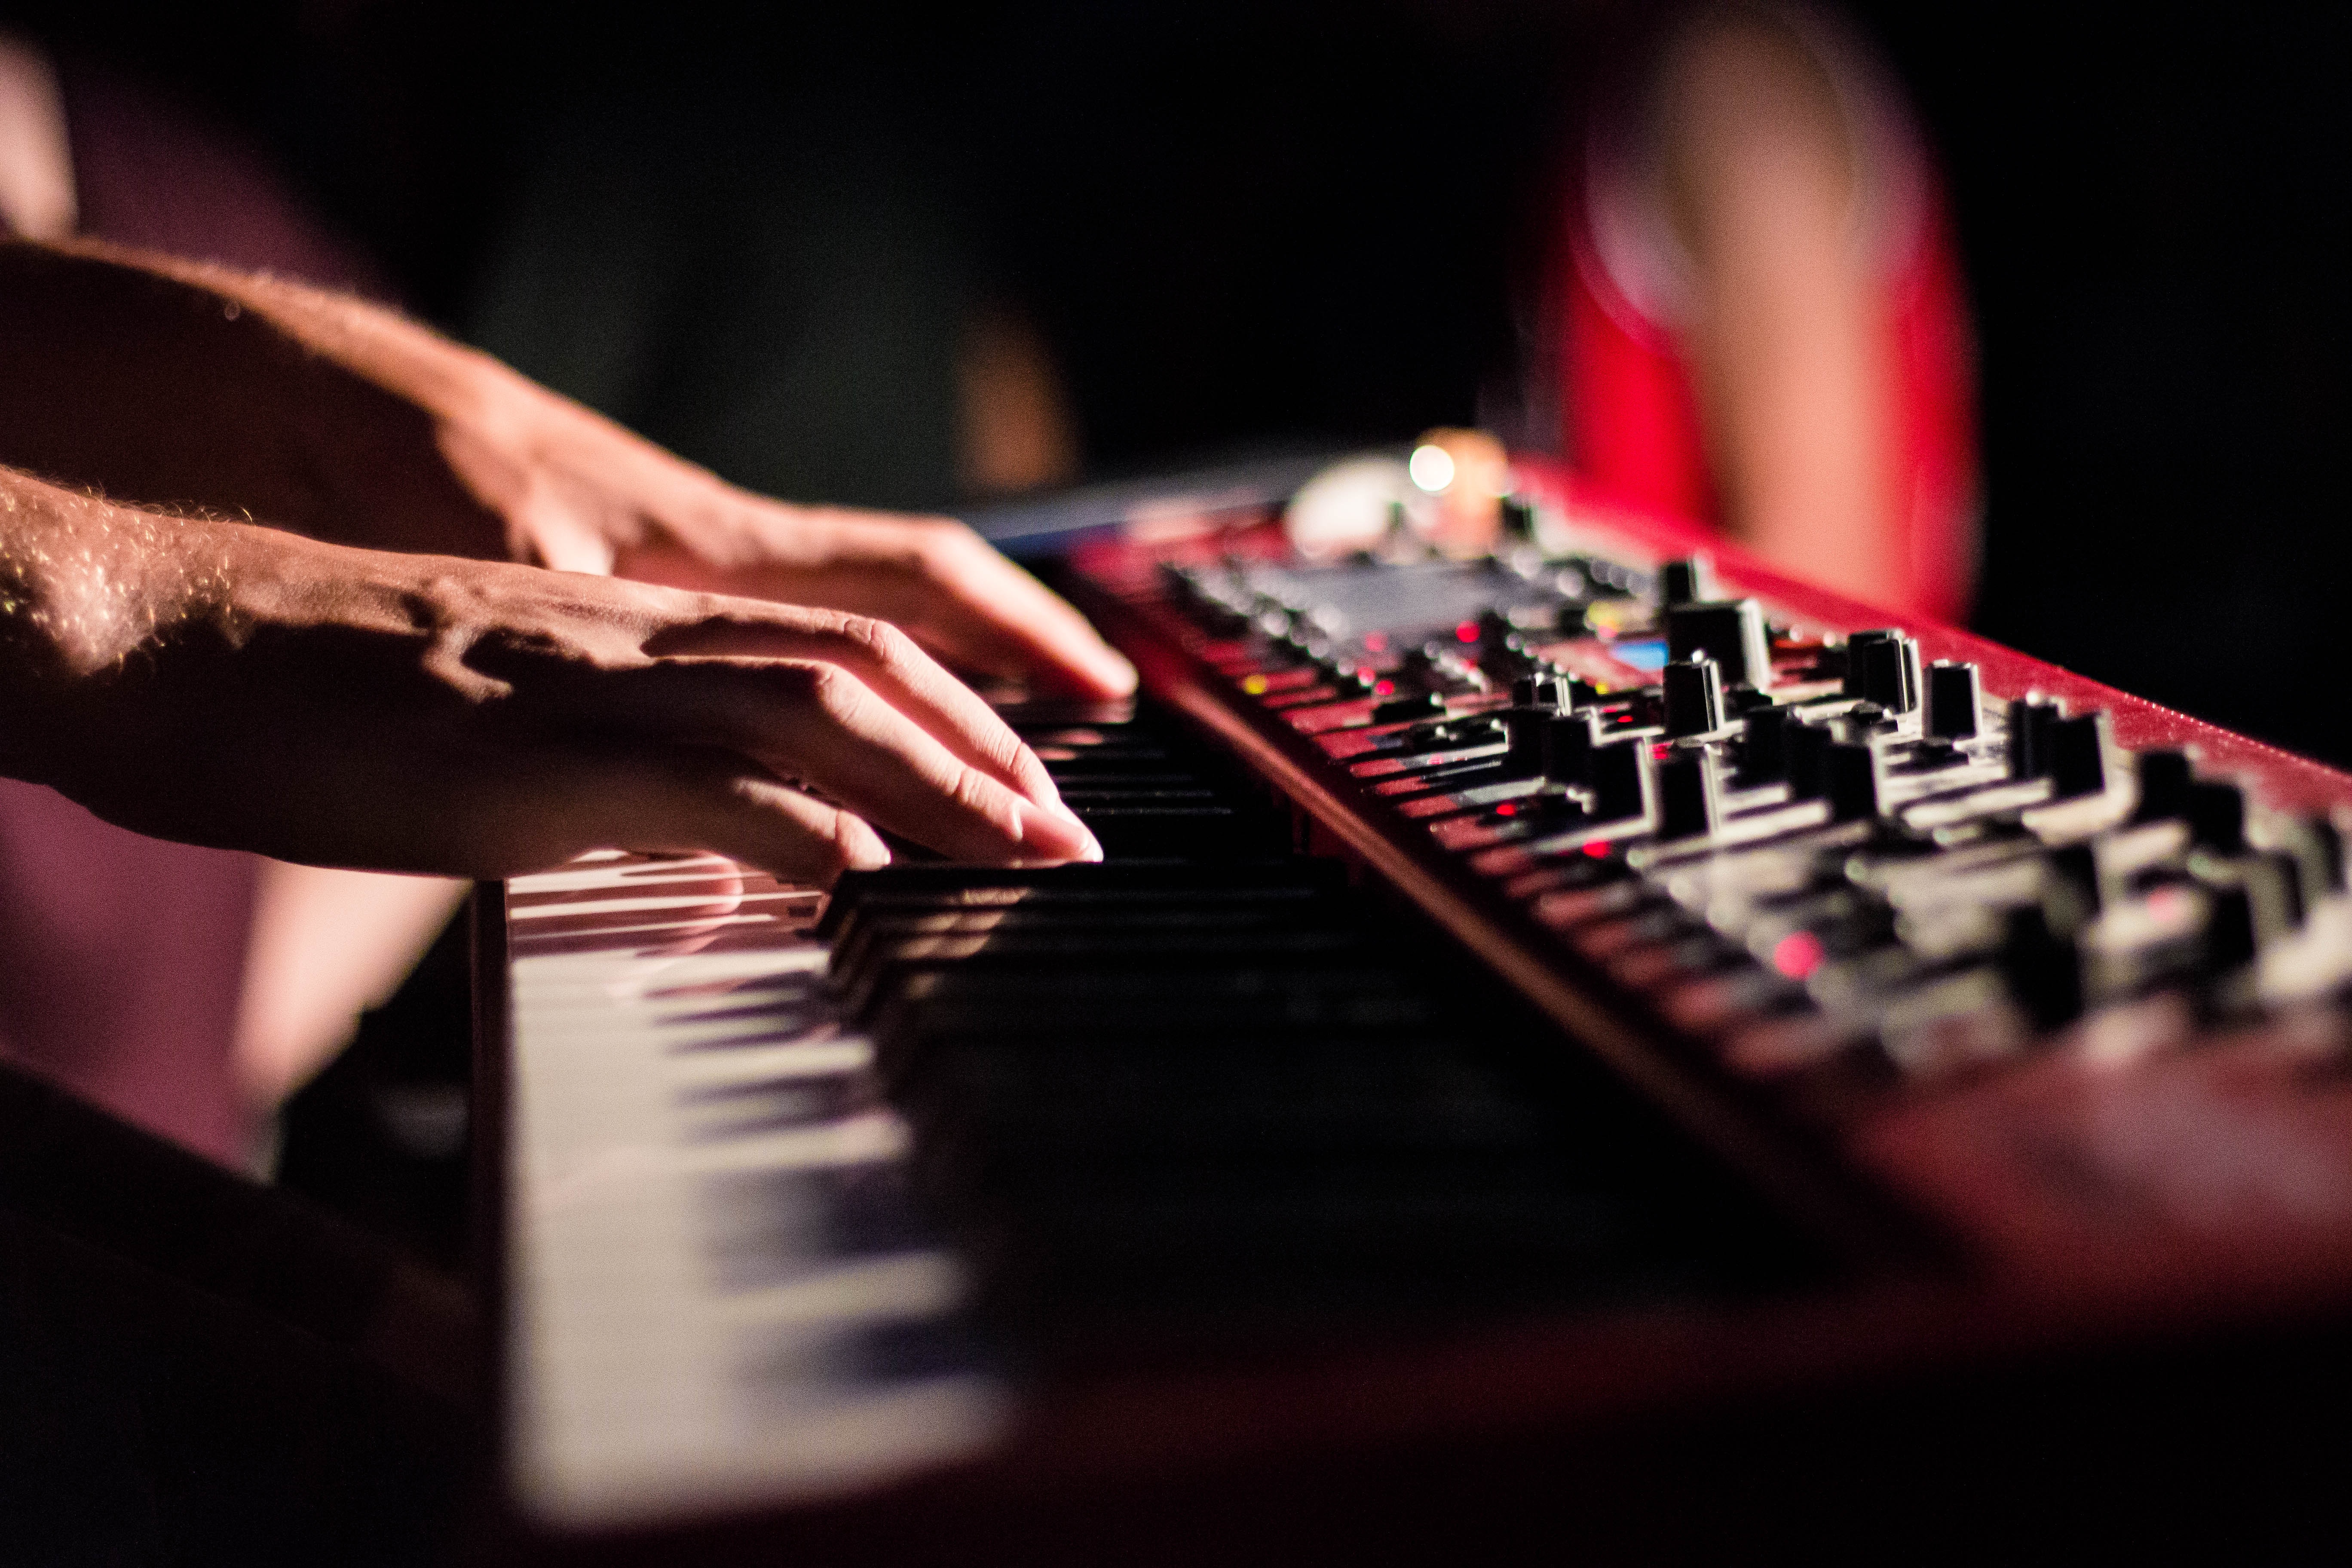 musical instrument, synthesizer, music, hands, keys, fingers